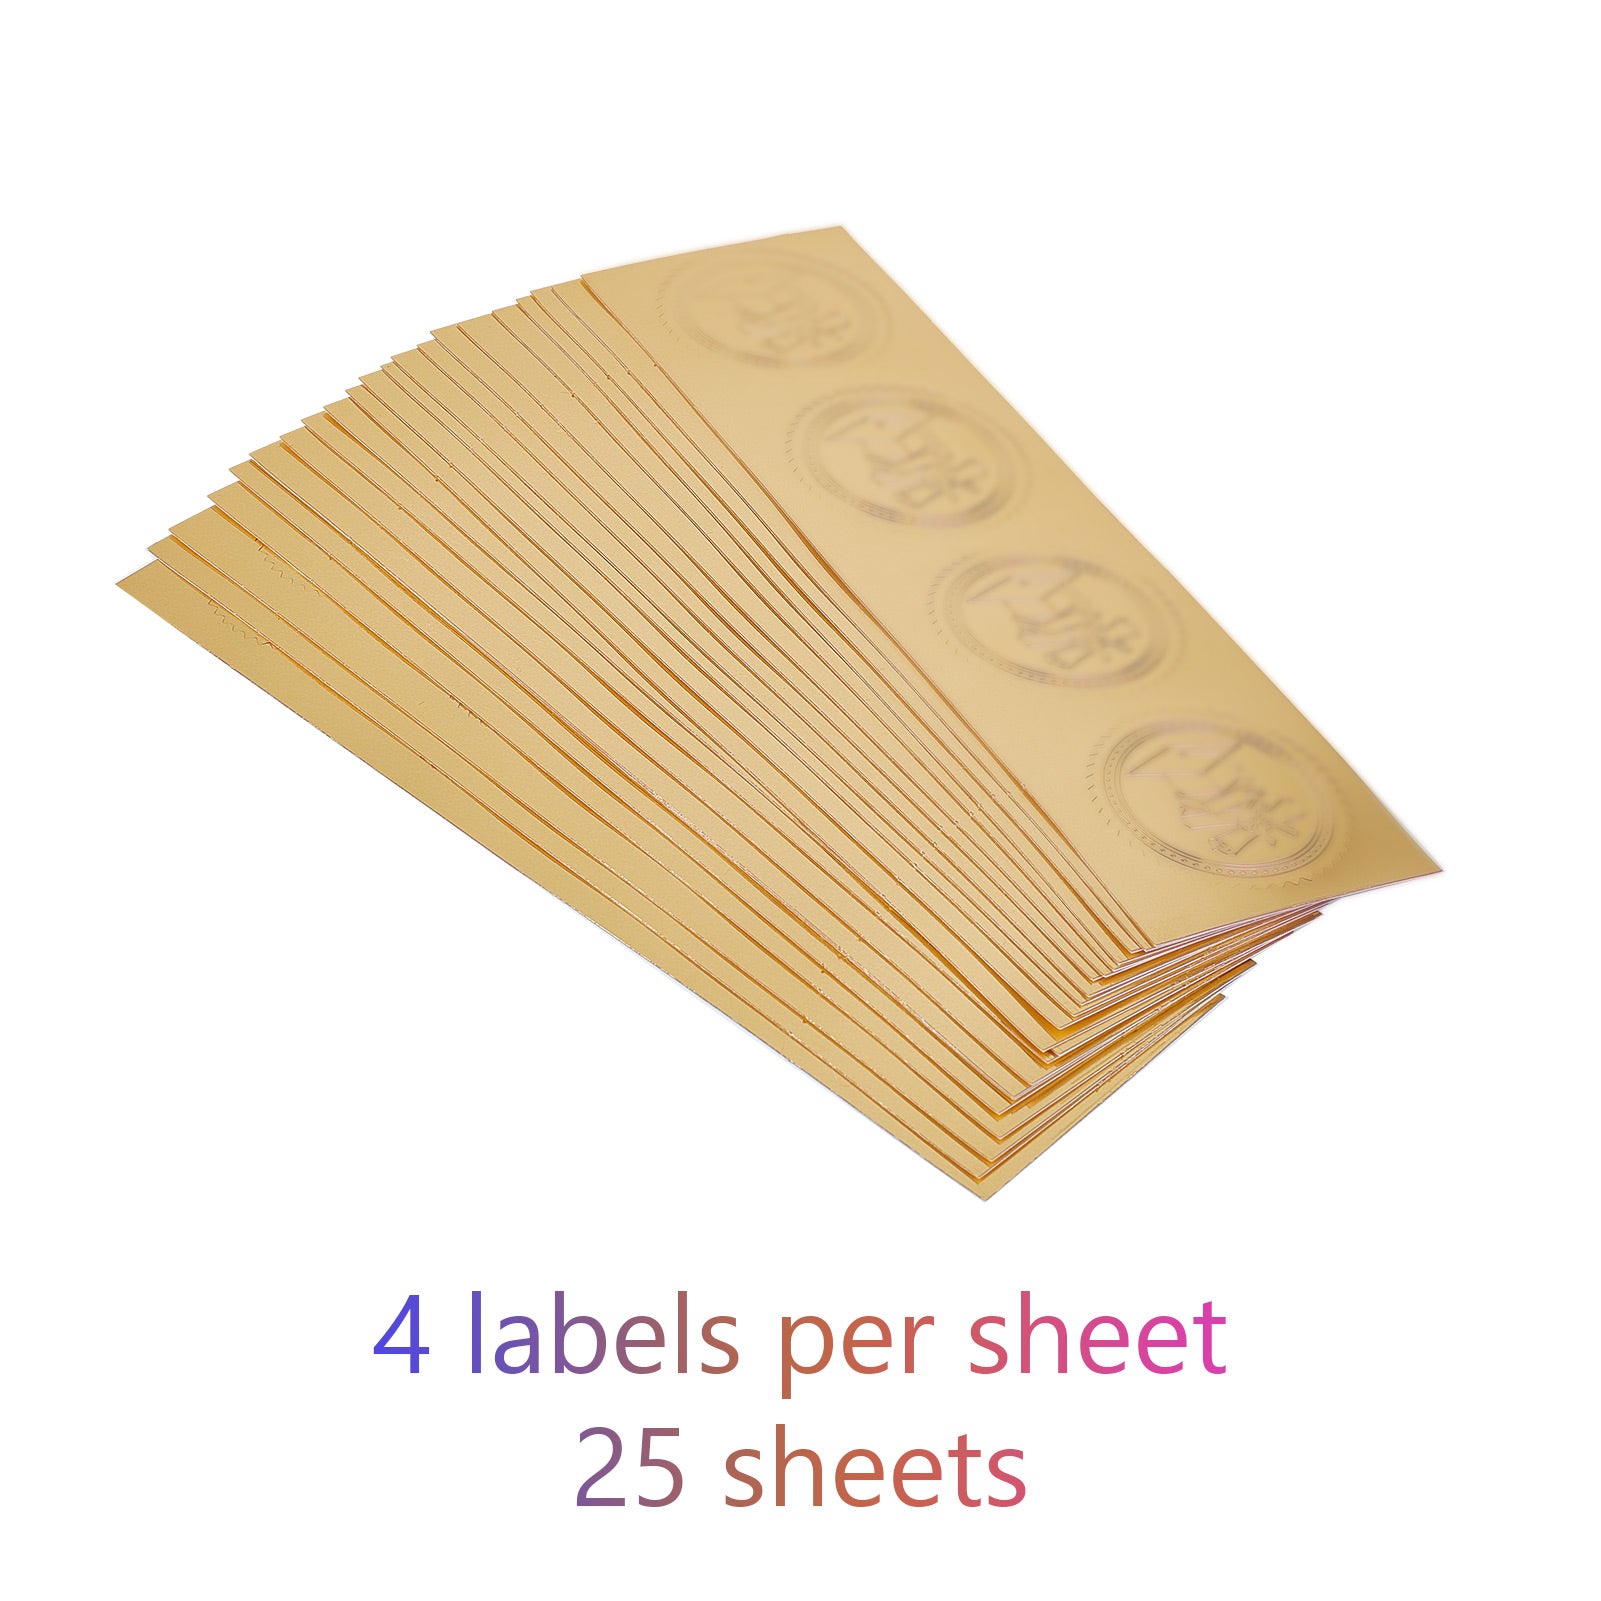 100pcs Embossed Gold Foil Certificate Seals Self Adhesive Stickers-15